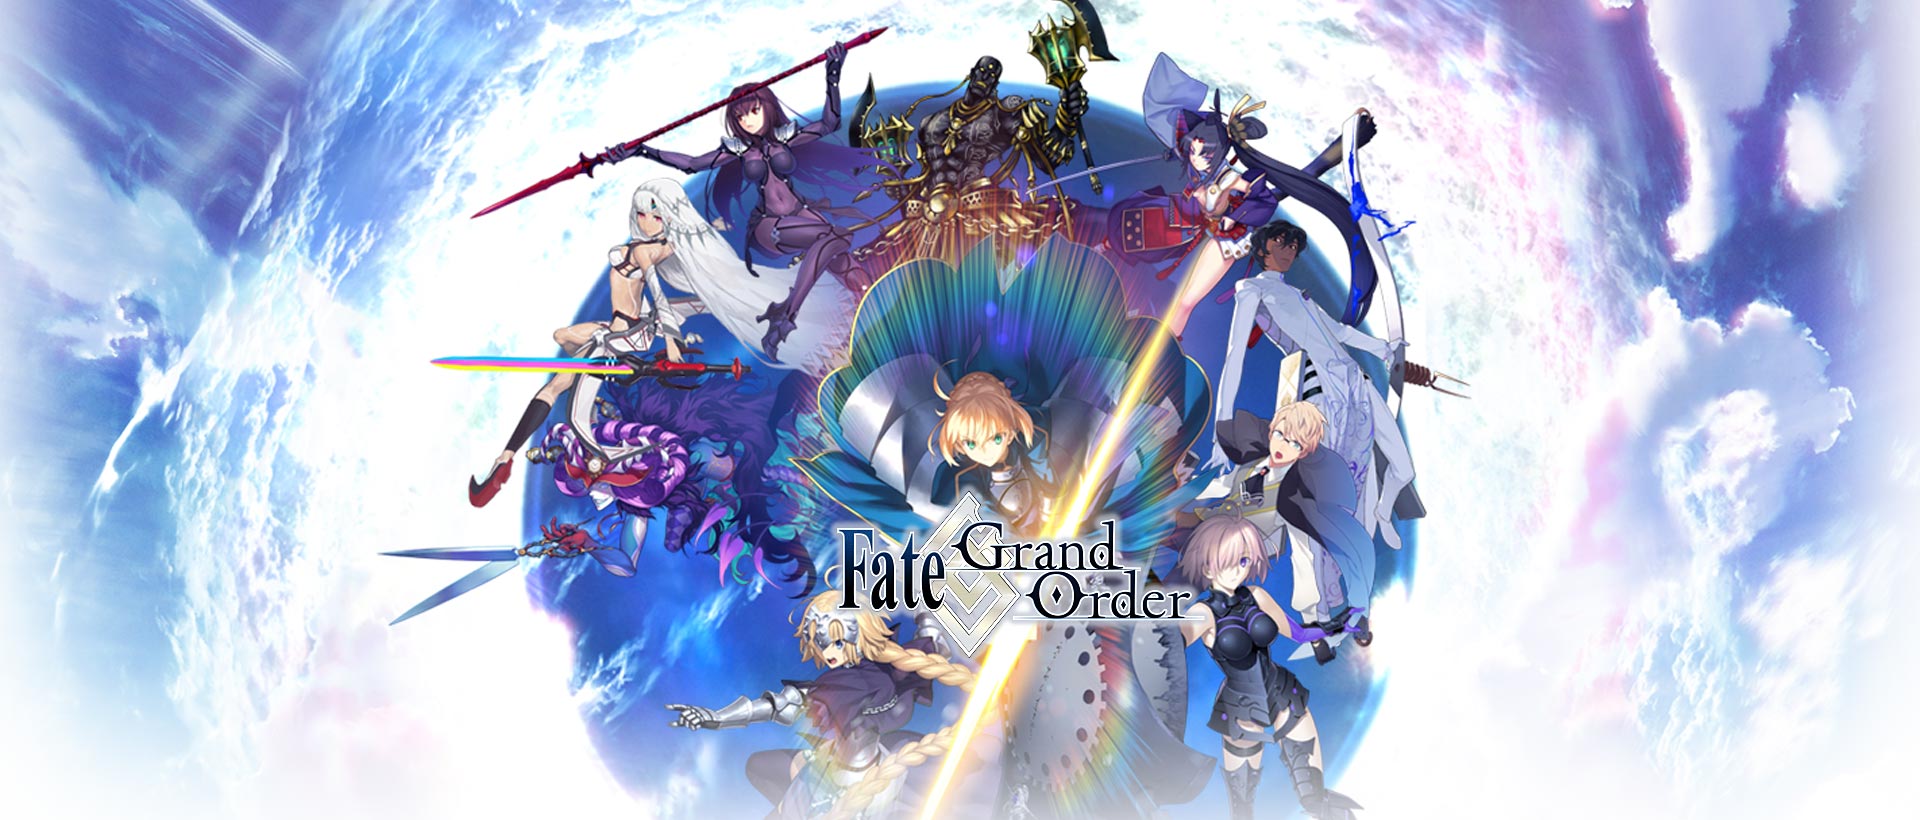 Download & Play Fate/Grand Order on PC & Mac with NoxPlayer (Emulator)